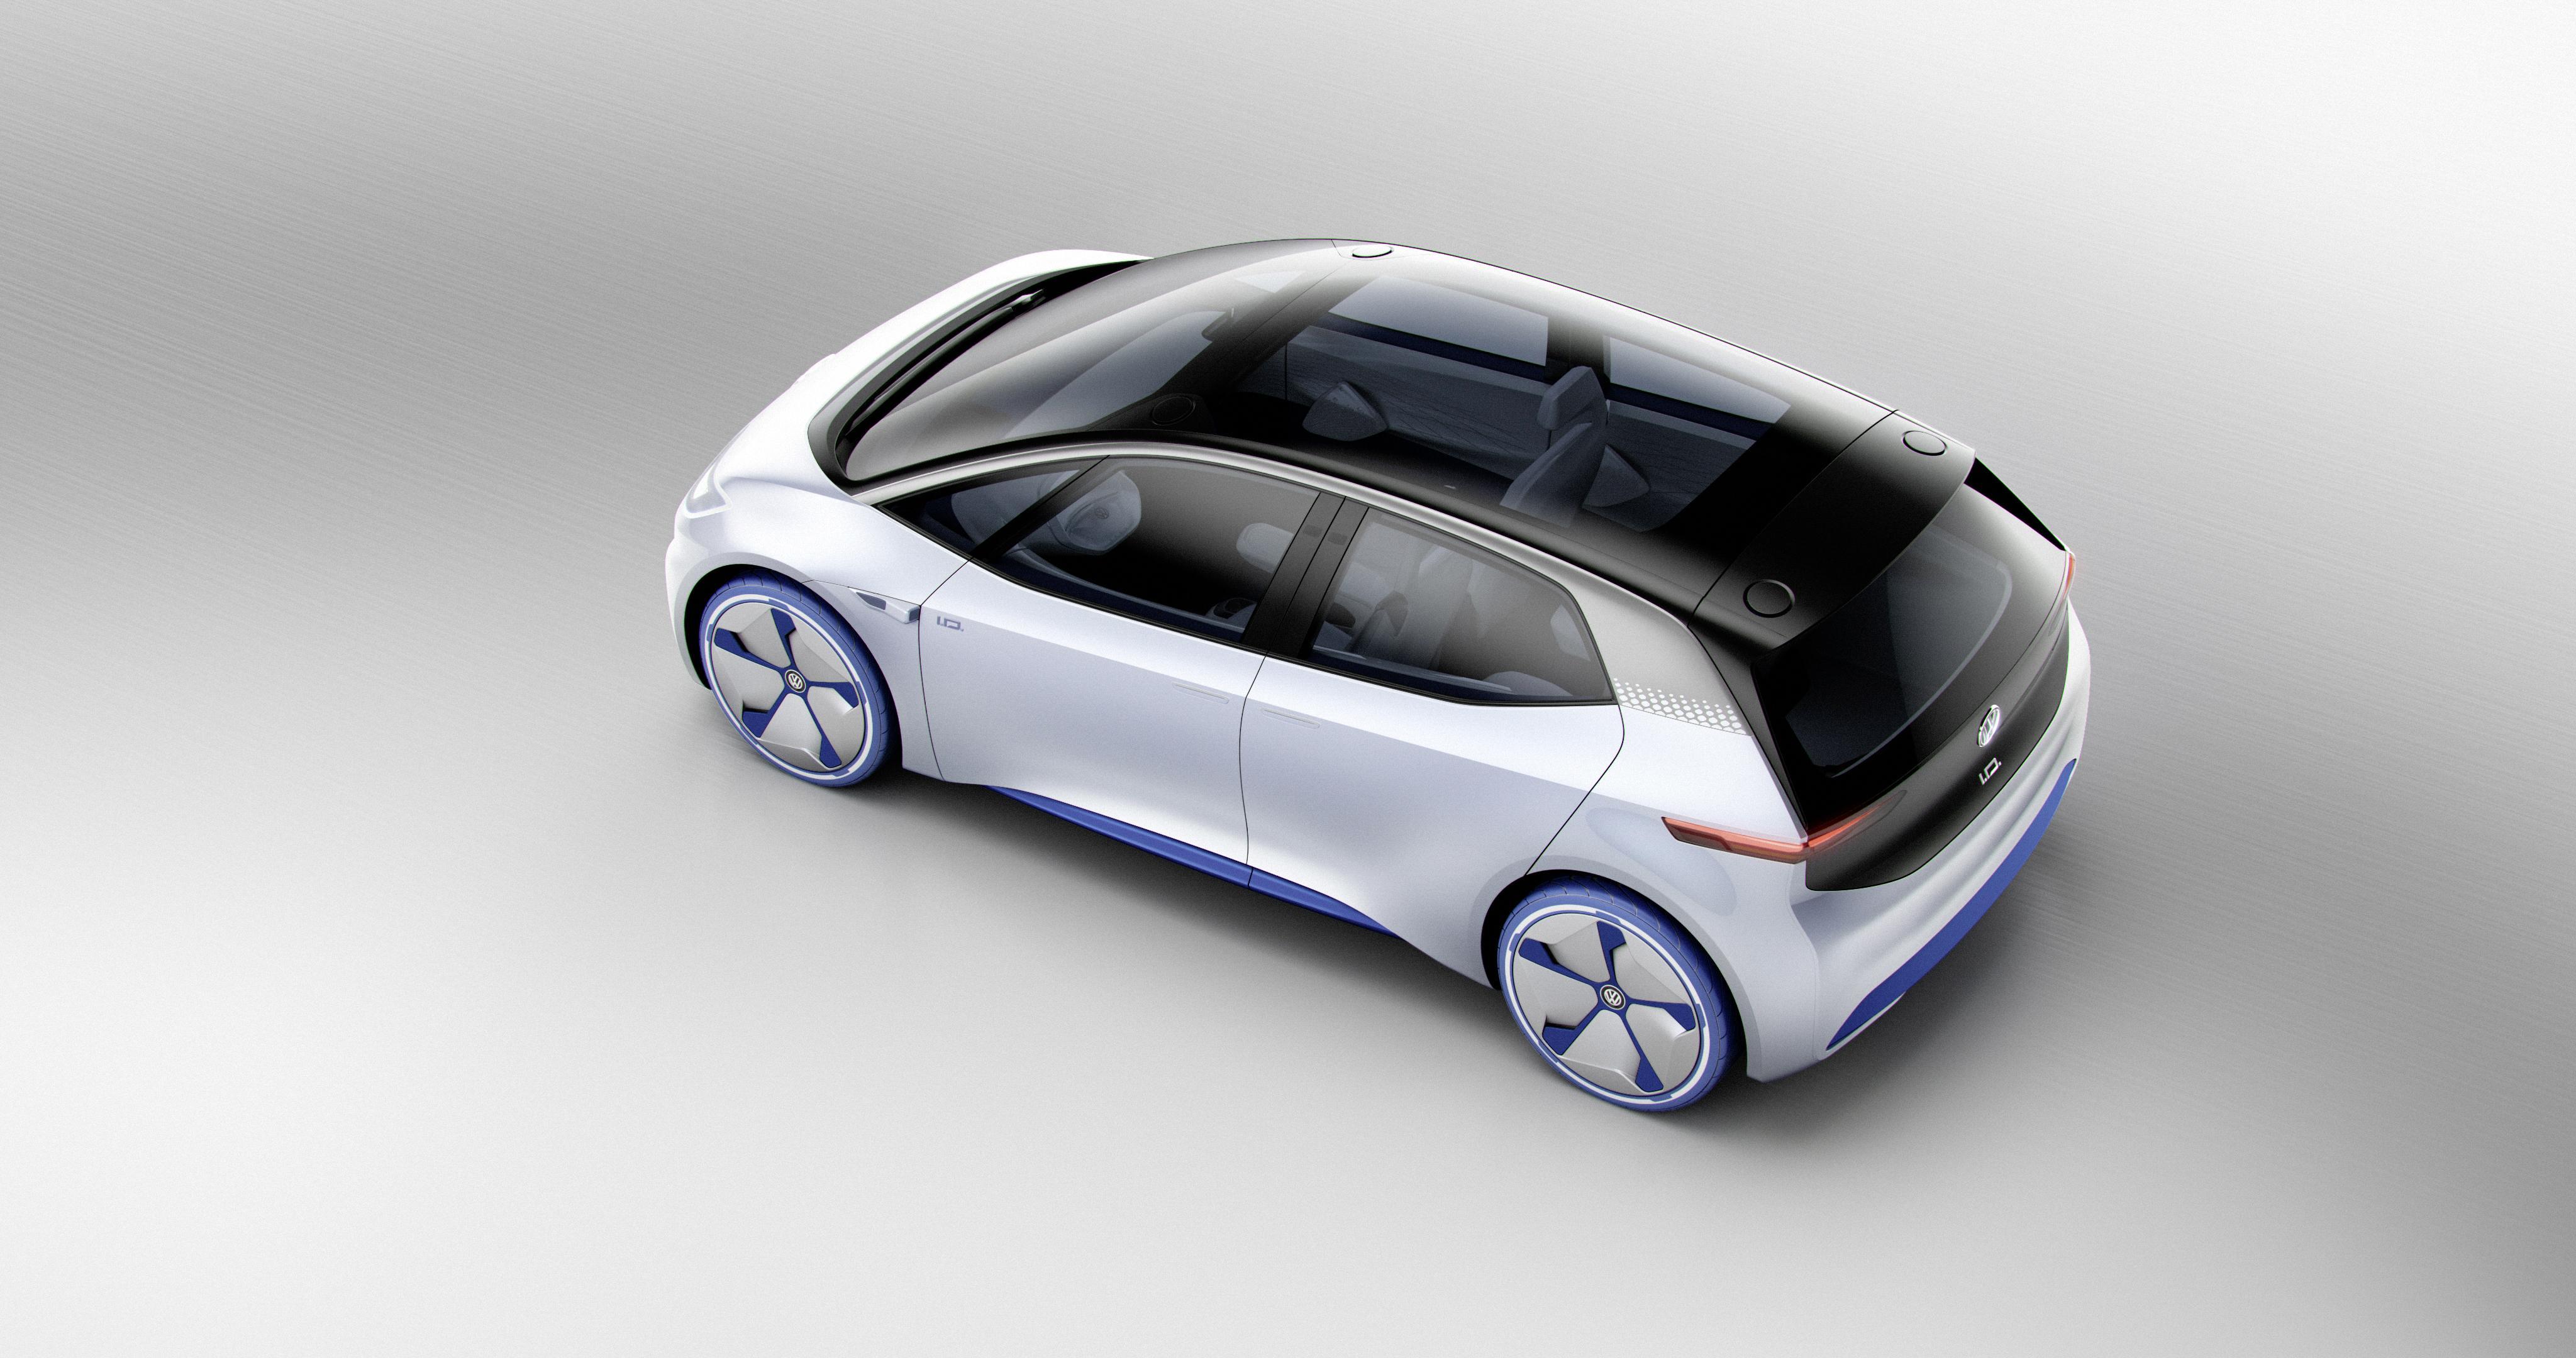 Paris Motor Show: Volkswagen Releases More Picture of ID Electric